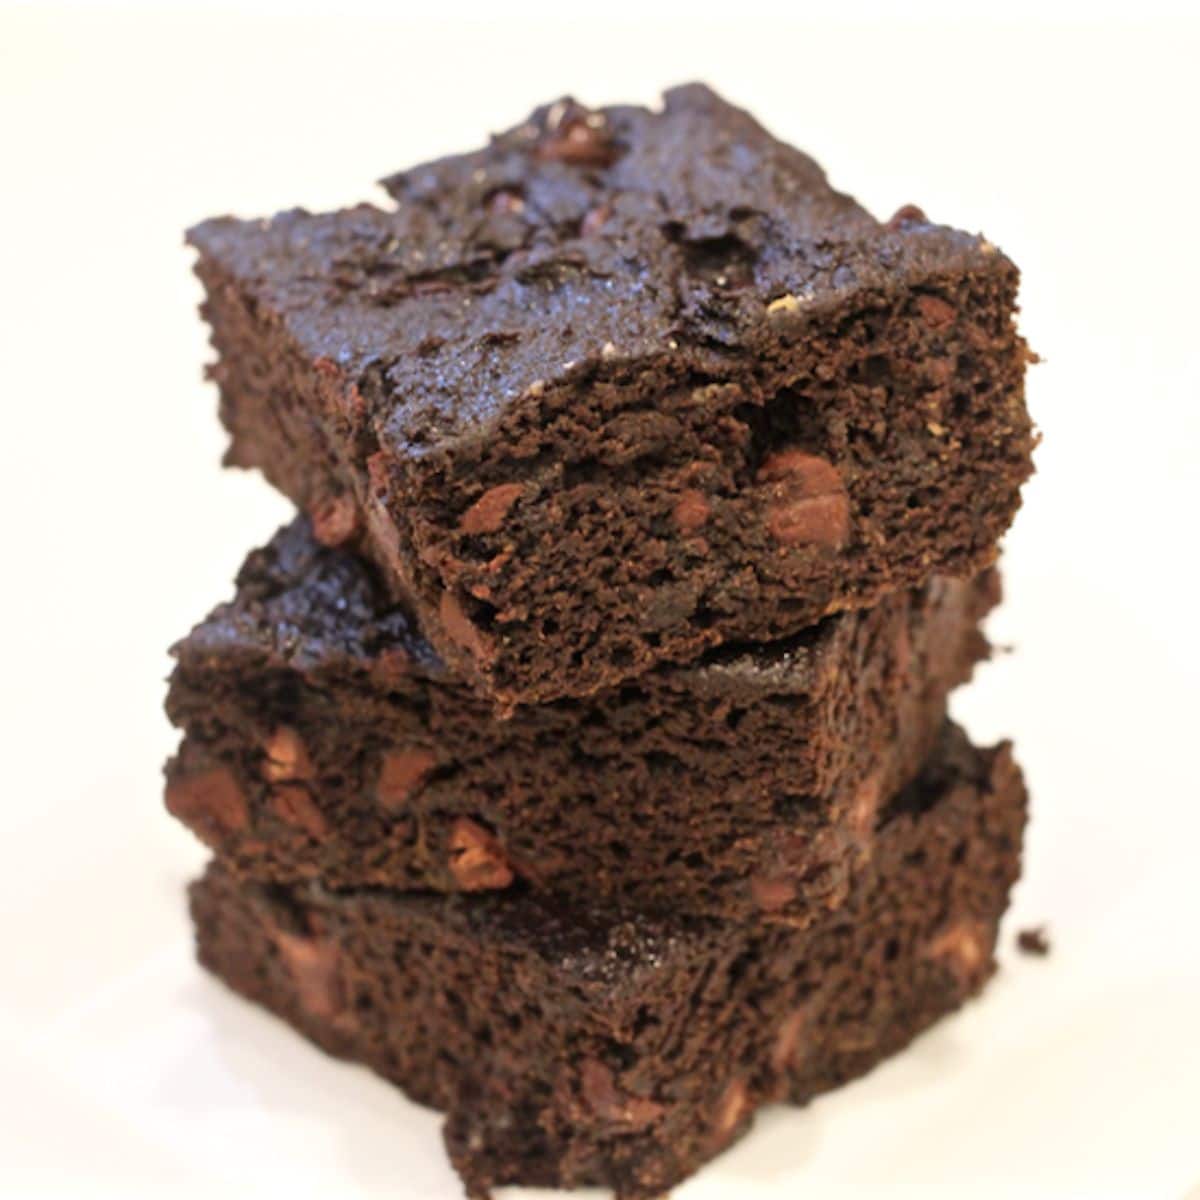 A stack of three pieces of fudgy chocolate pumpkin cake with chocolate chips.